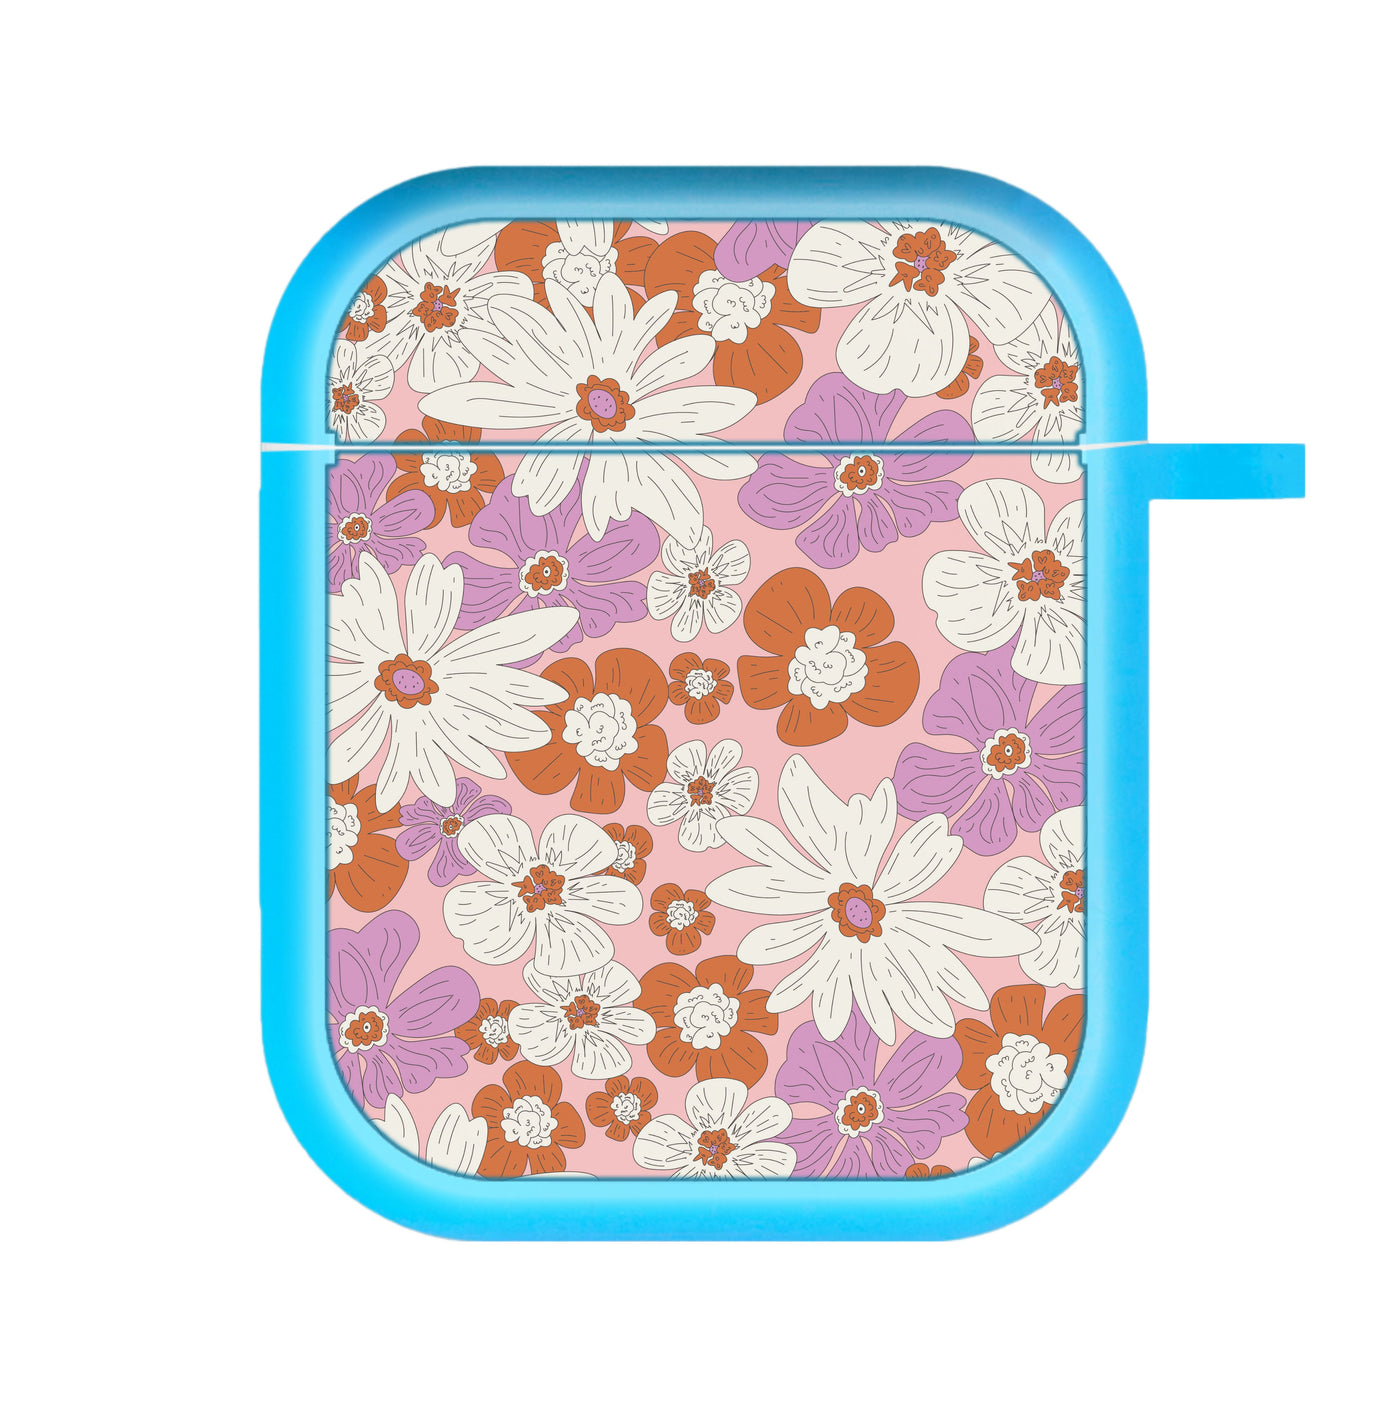 Retro Flowers - Floral Patterns AirPods Case